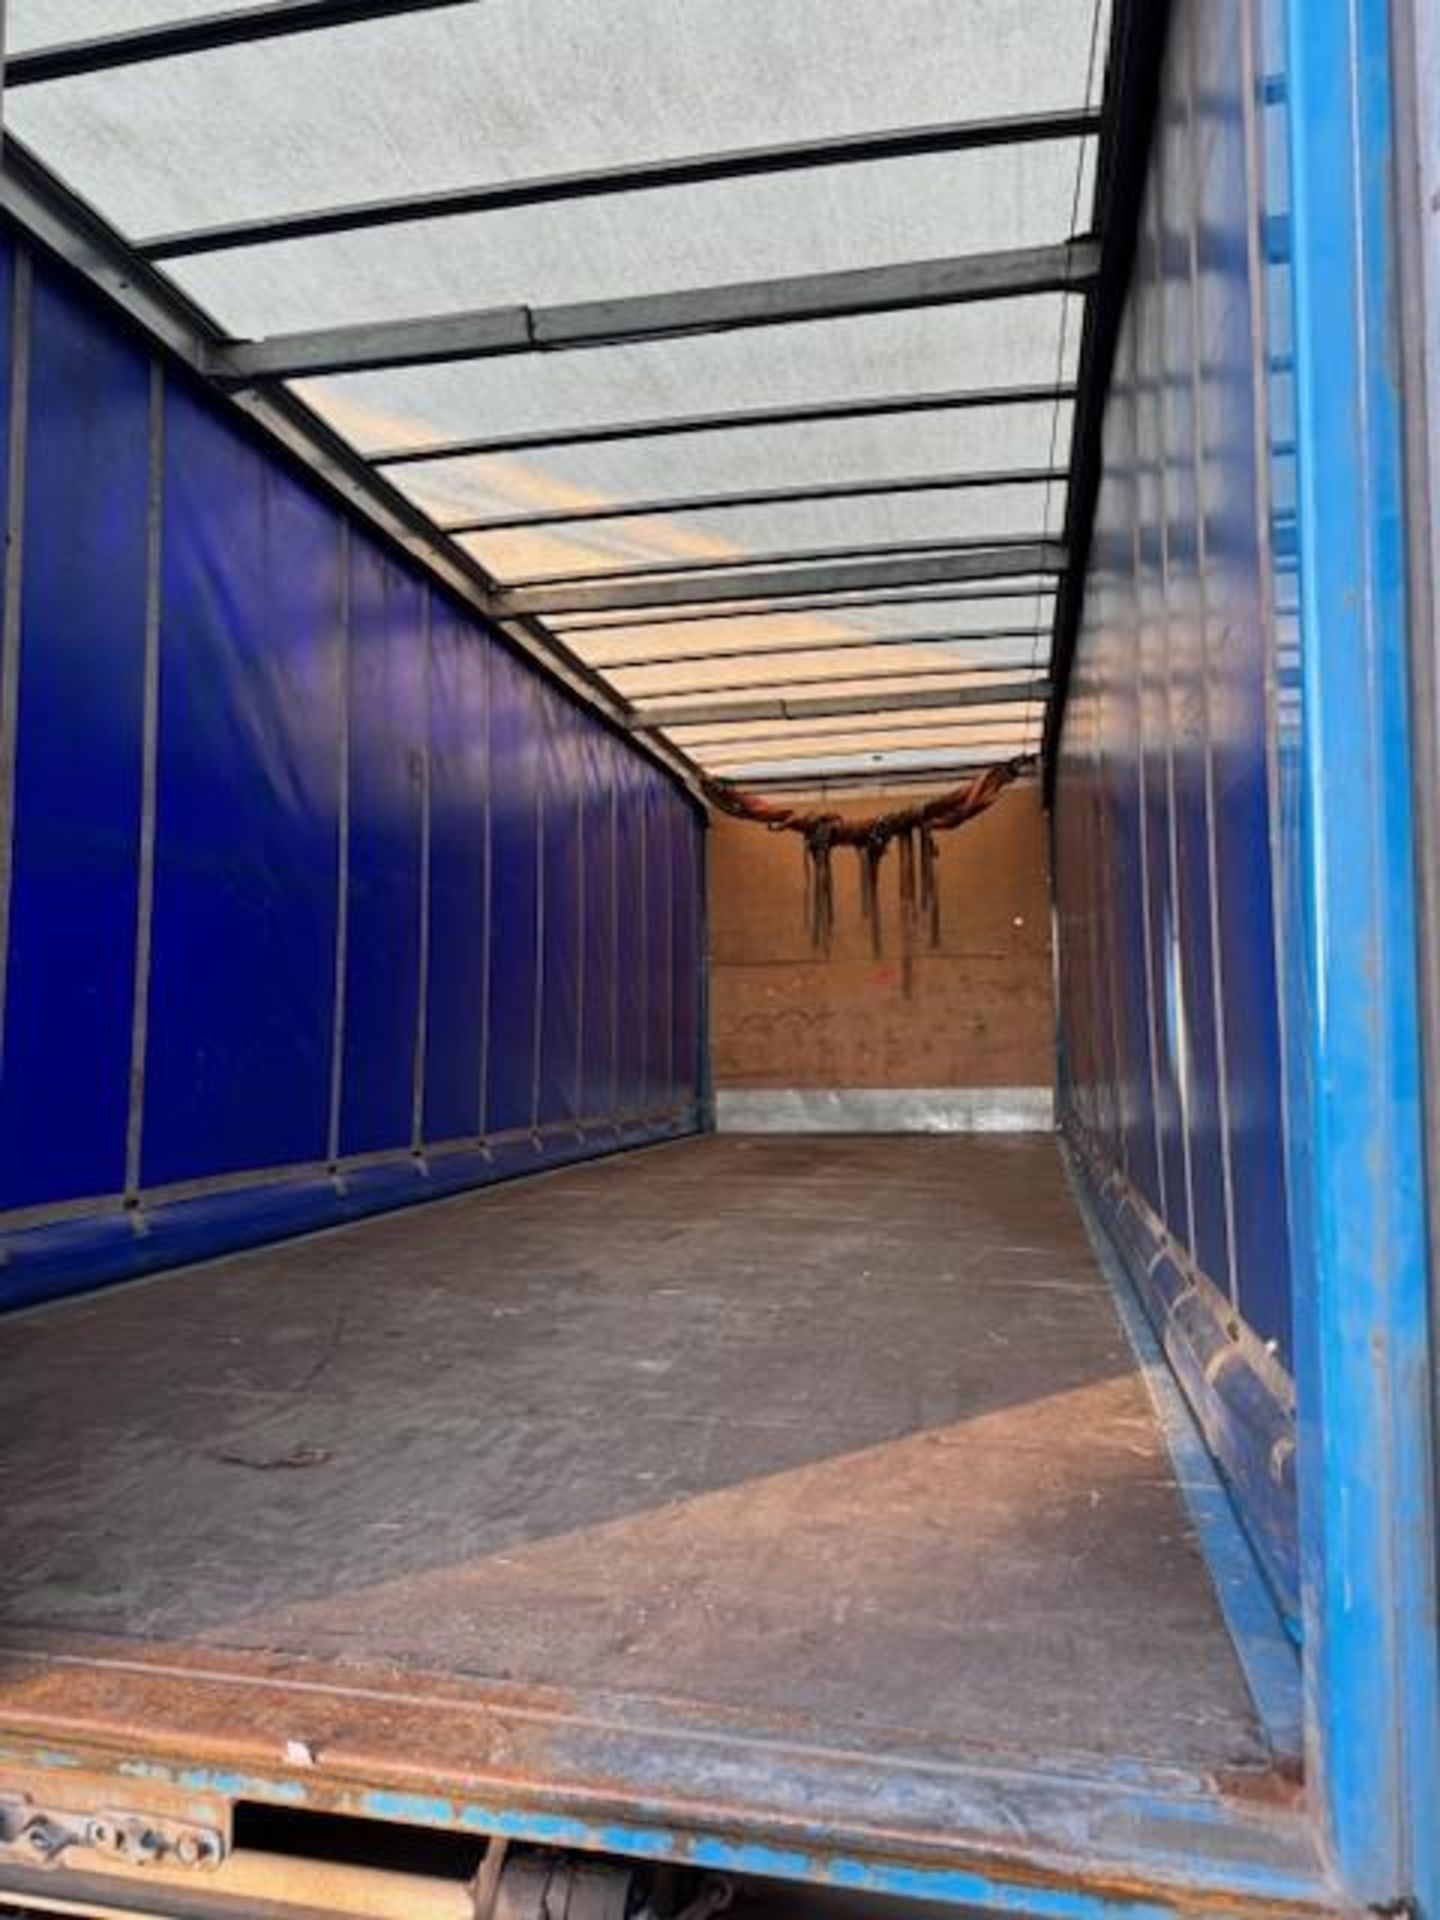 DAF CF 260 sleep cab euro 6 18T curtainside lorry with foldaway tail lift - Image 11 of 18